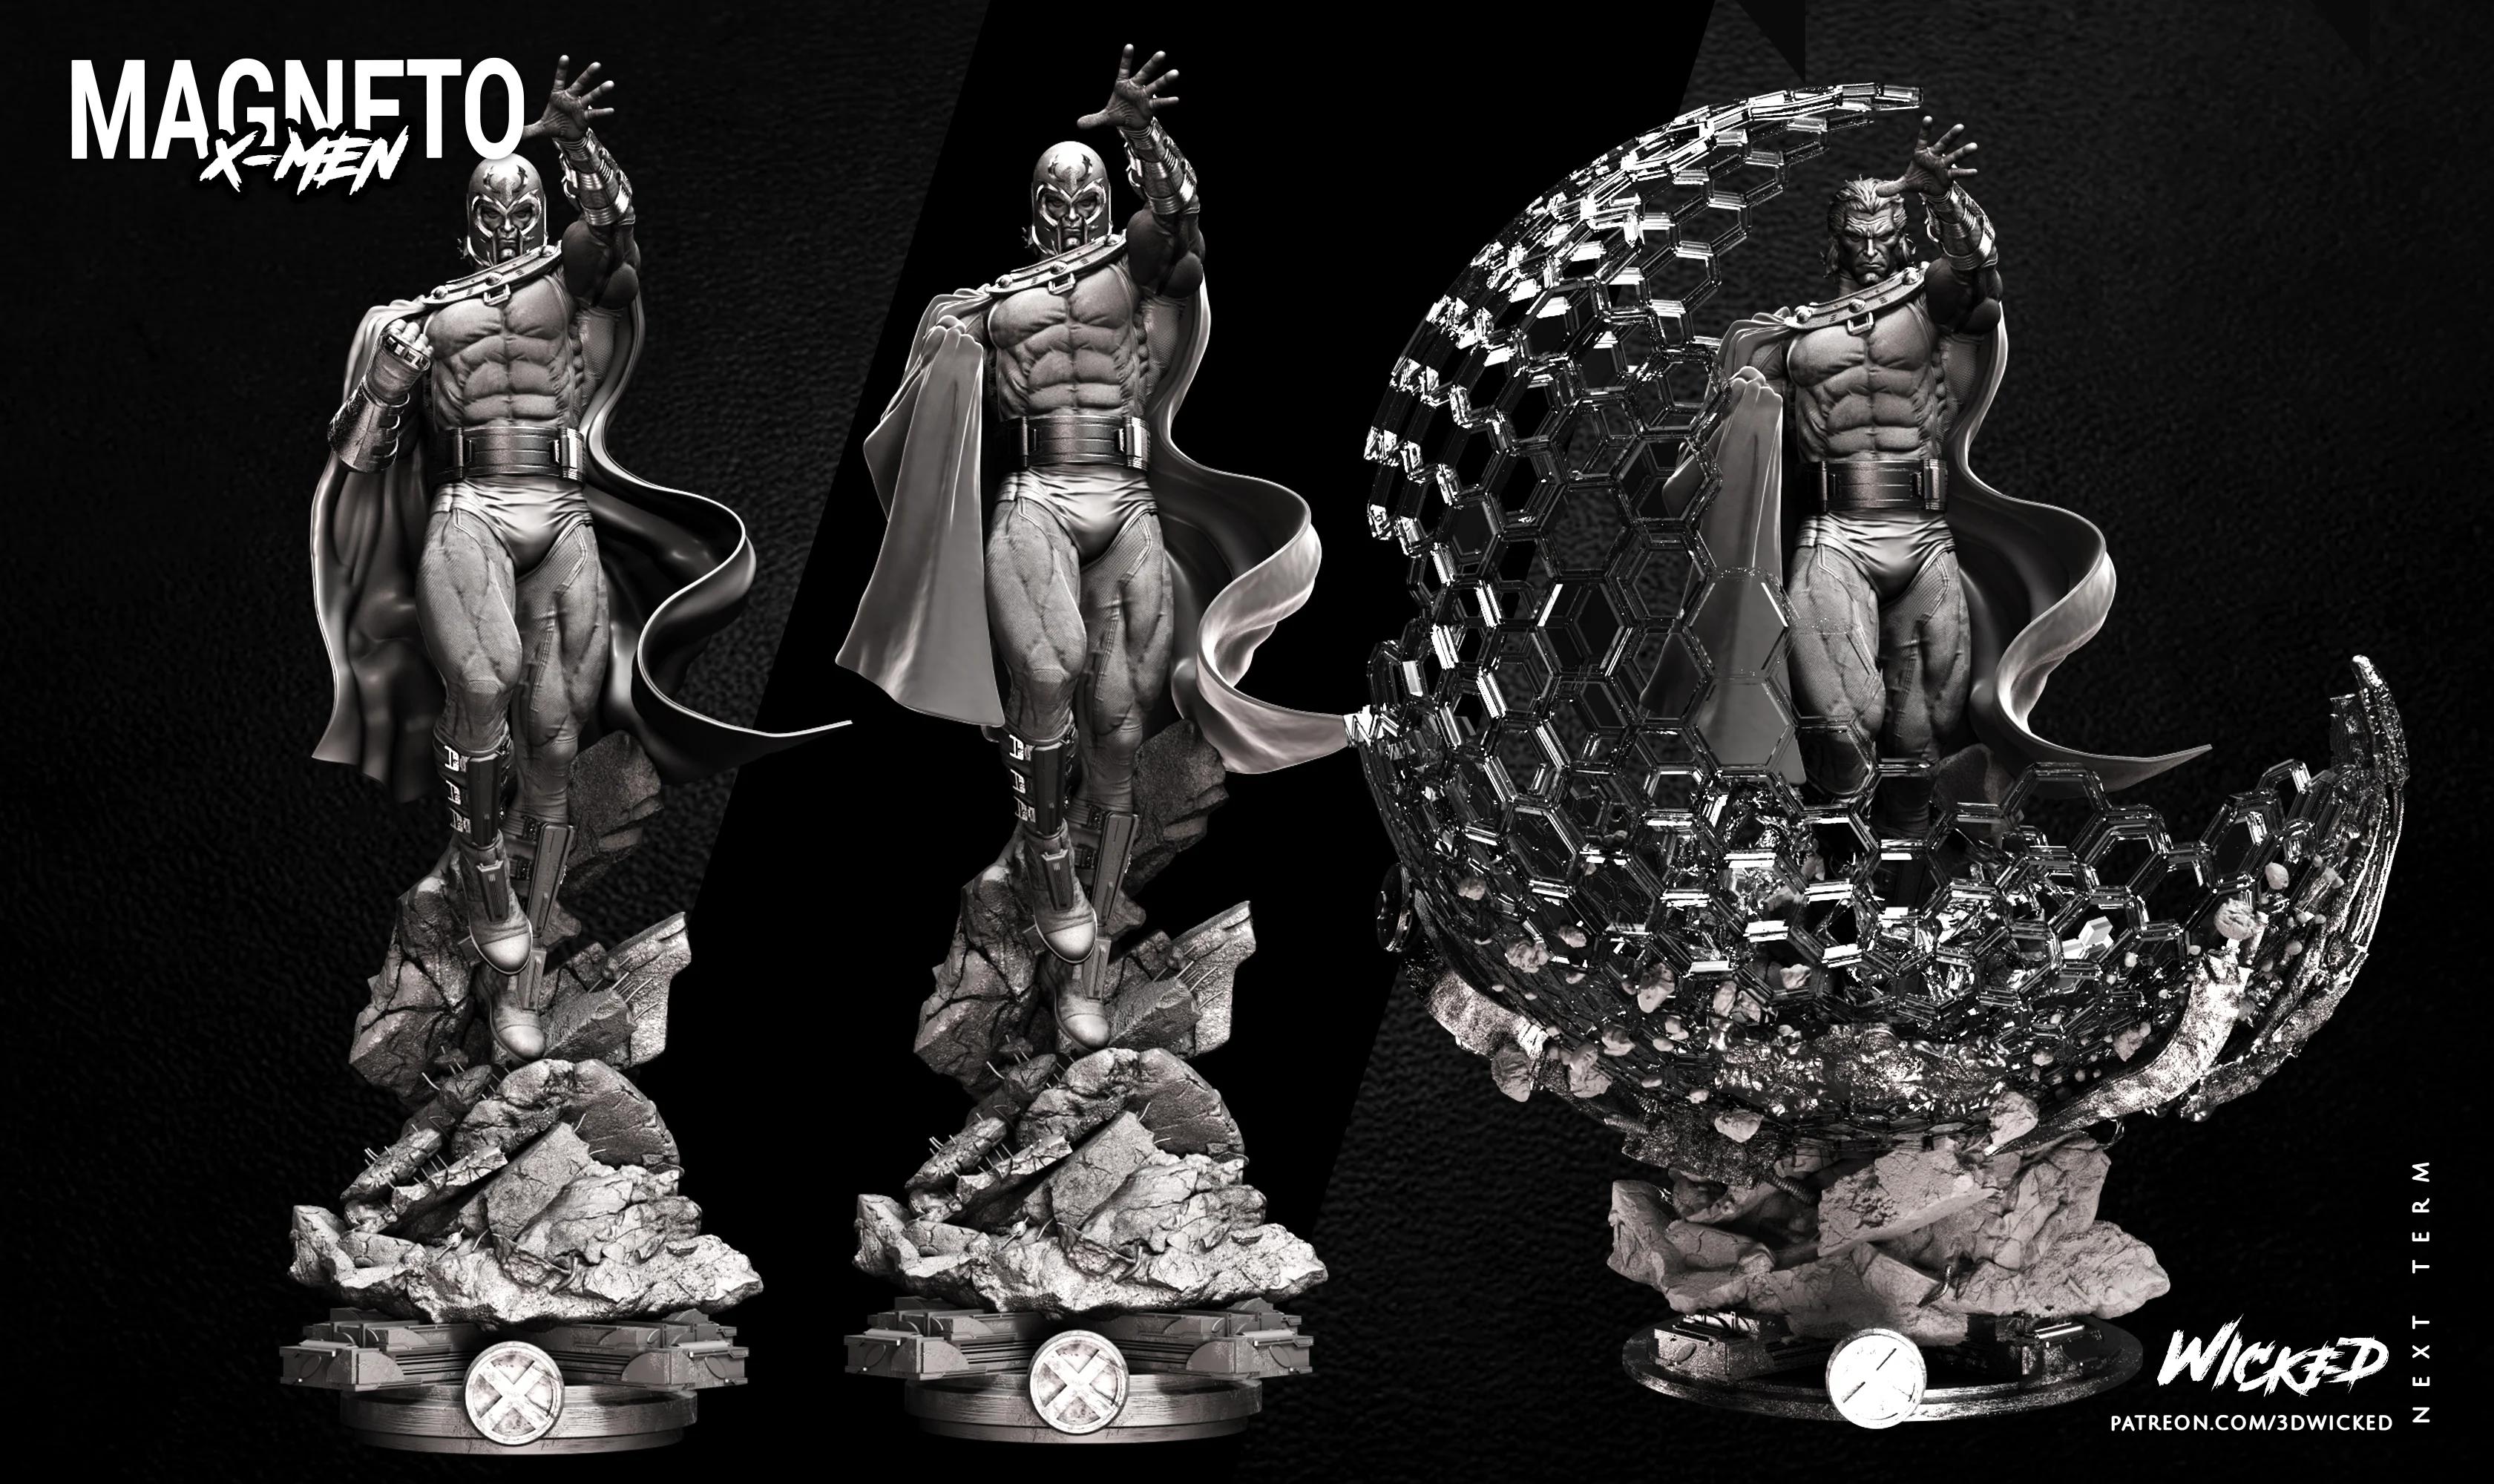 Wicked Marvel Magneto Sculpture: Tested and ready for 3d printing 3d model